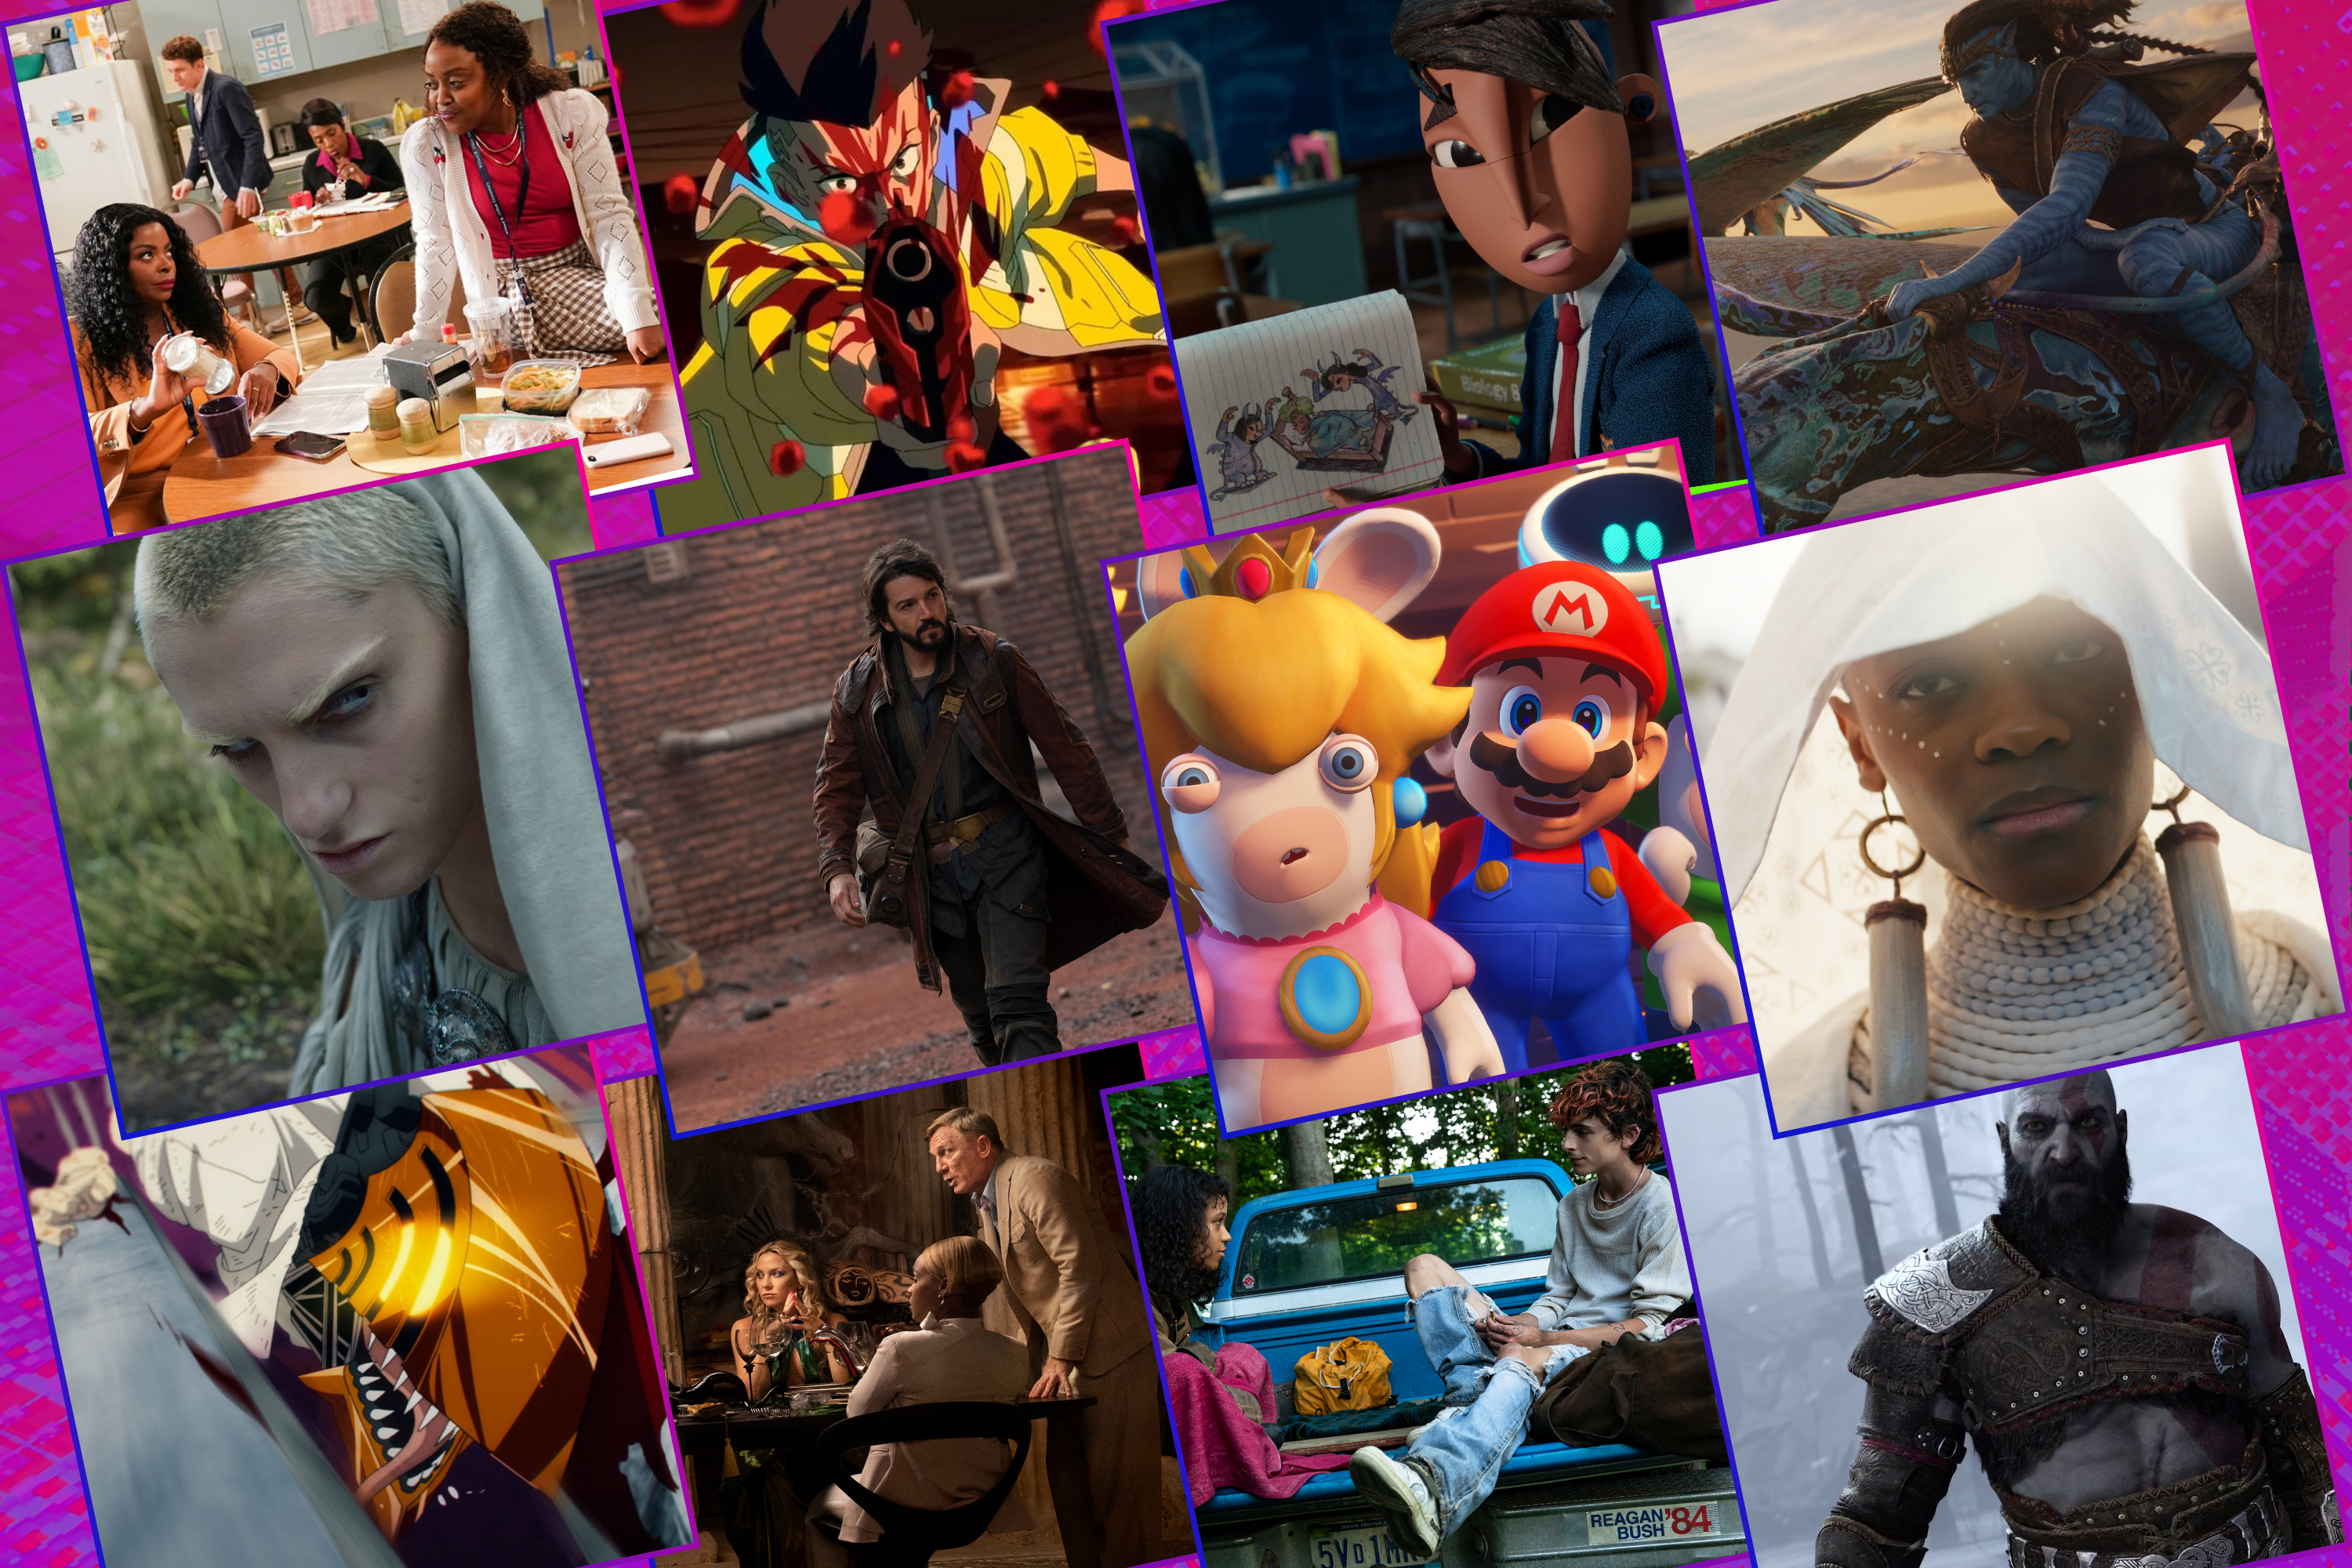 Collage of images of upcoming titles featured in this preview